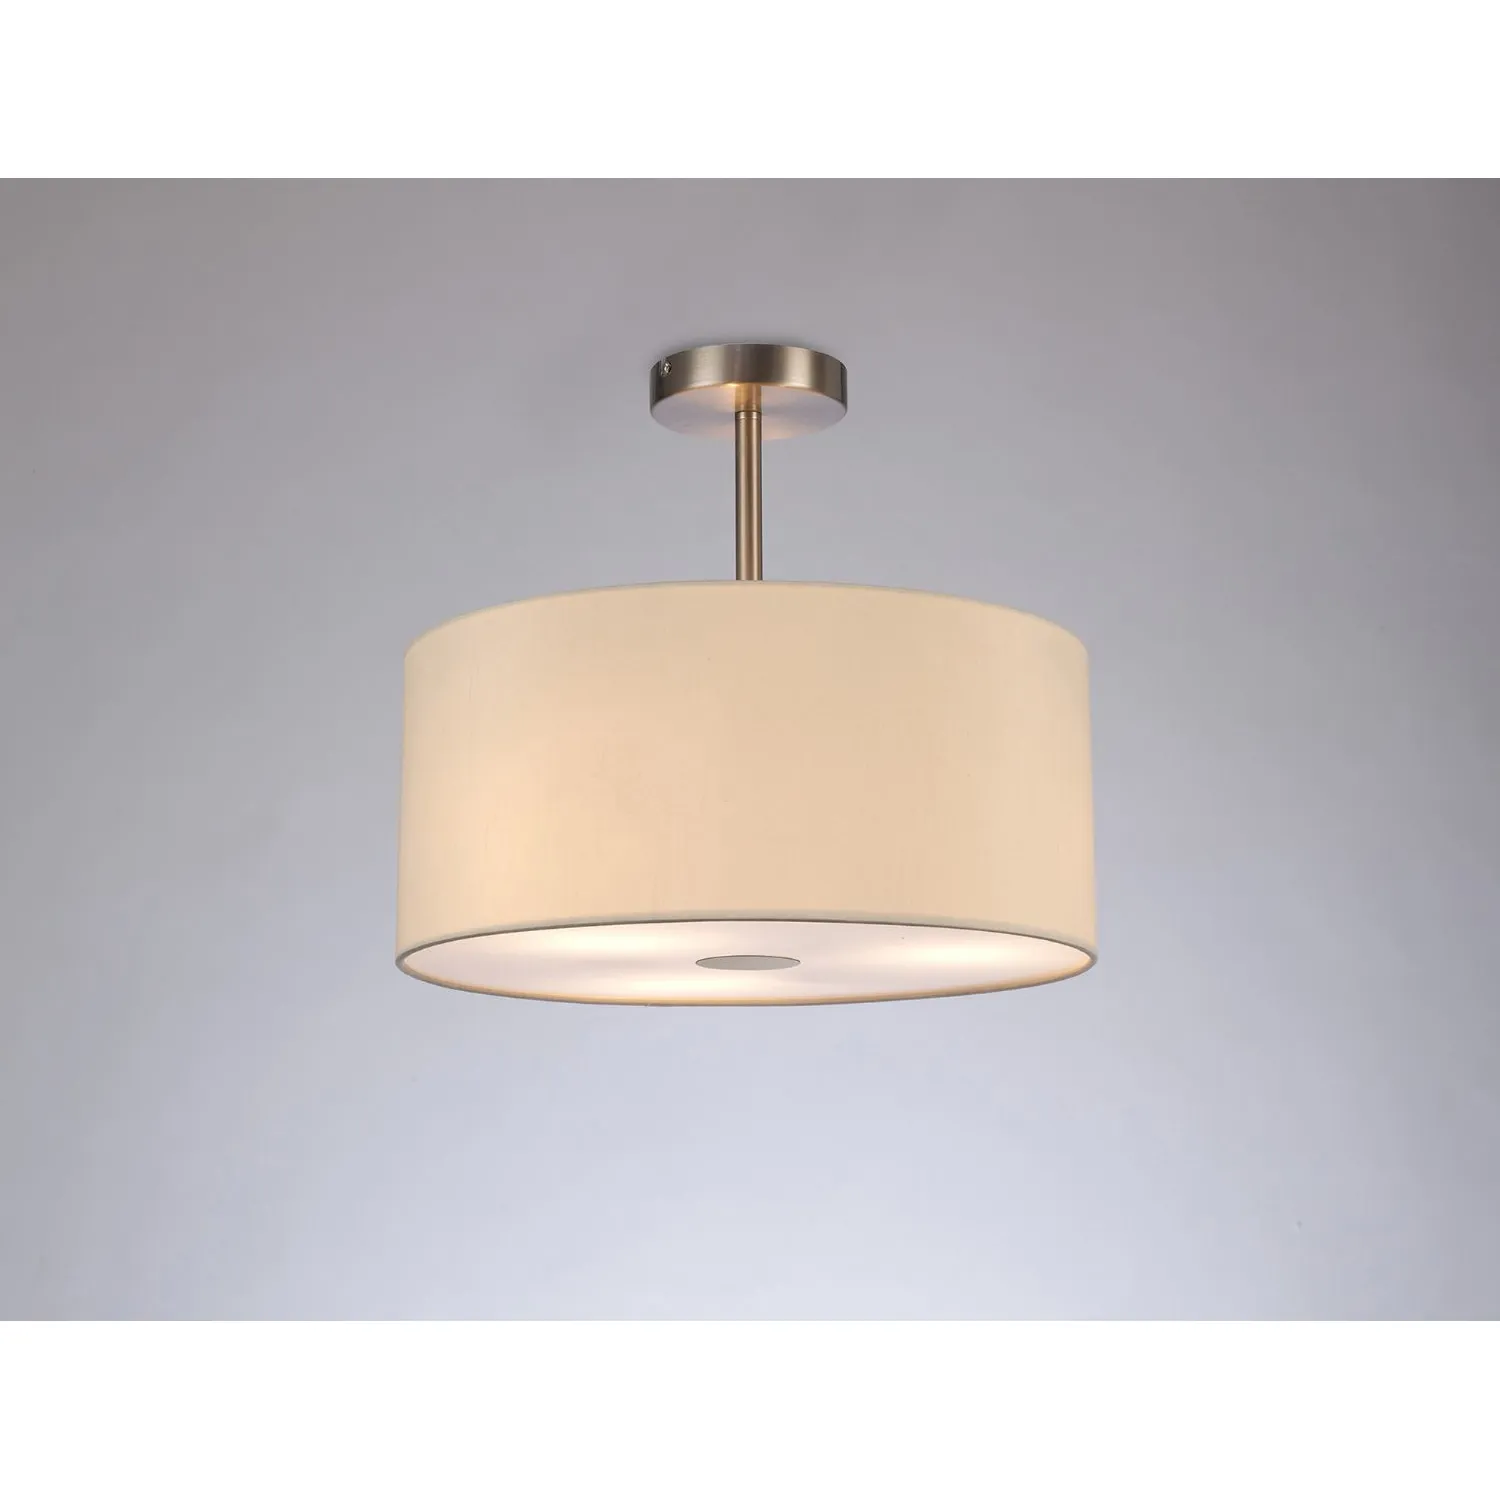 Baymont Satin Nickel 3 Light E27 Semi Flush c w 400mm Faux Silk Shade, Ivory Pearl White Laminate And 400mm Frosted SN Acrylic Diffuser